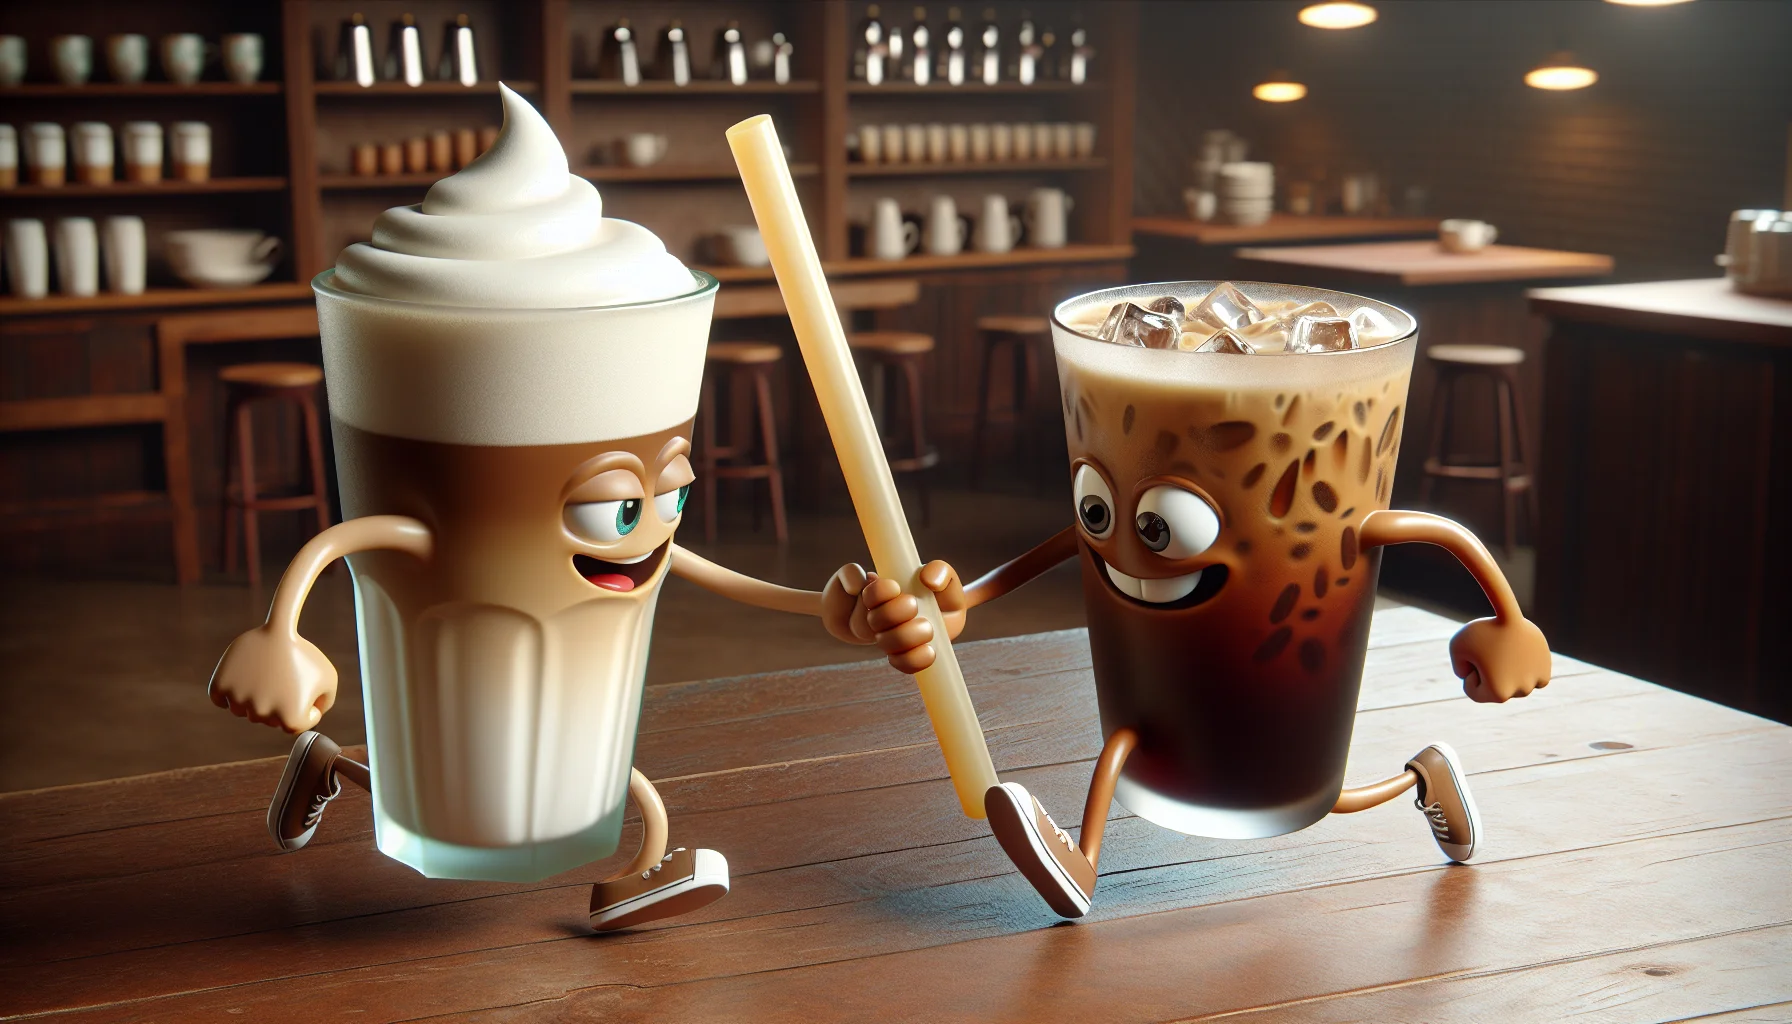 Create a humorous, photorealistic image that showcases the rivalry between an iced latte and an iced coffee. Image should depict both drinks in anthropomorphic form, displaying playful expressions and engaged in a friendly competition to appeal to the audience. They could be seen engaging in a light-hearted race, where the iced latte - with a layer of frothy milk on top - races against the iced coffee, which carries a straw like a baton. The background should reveal a coffee shop setting seeping in warm and inviting tones, encouraging people to enjoy their favorite brew.